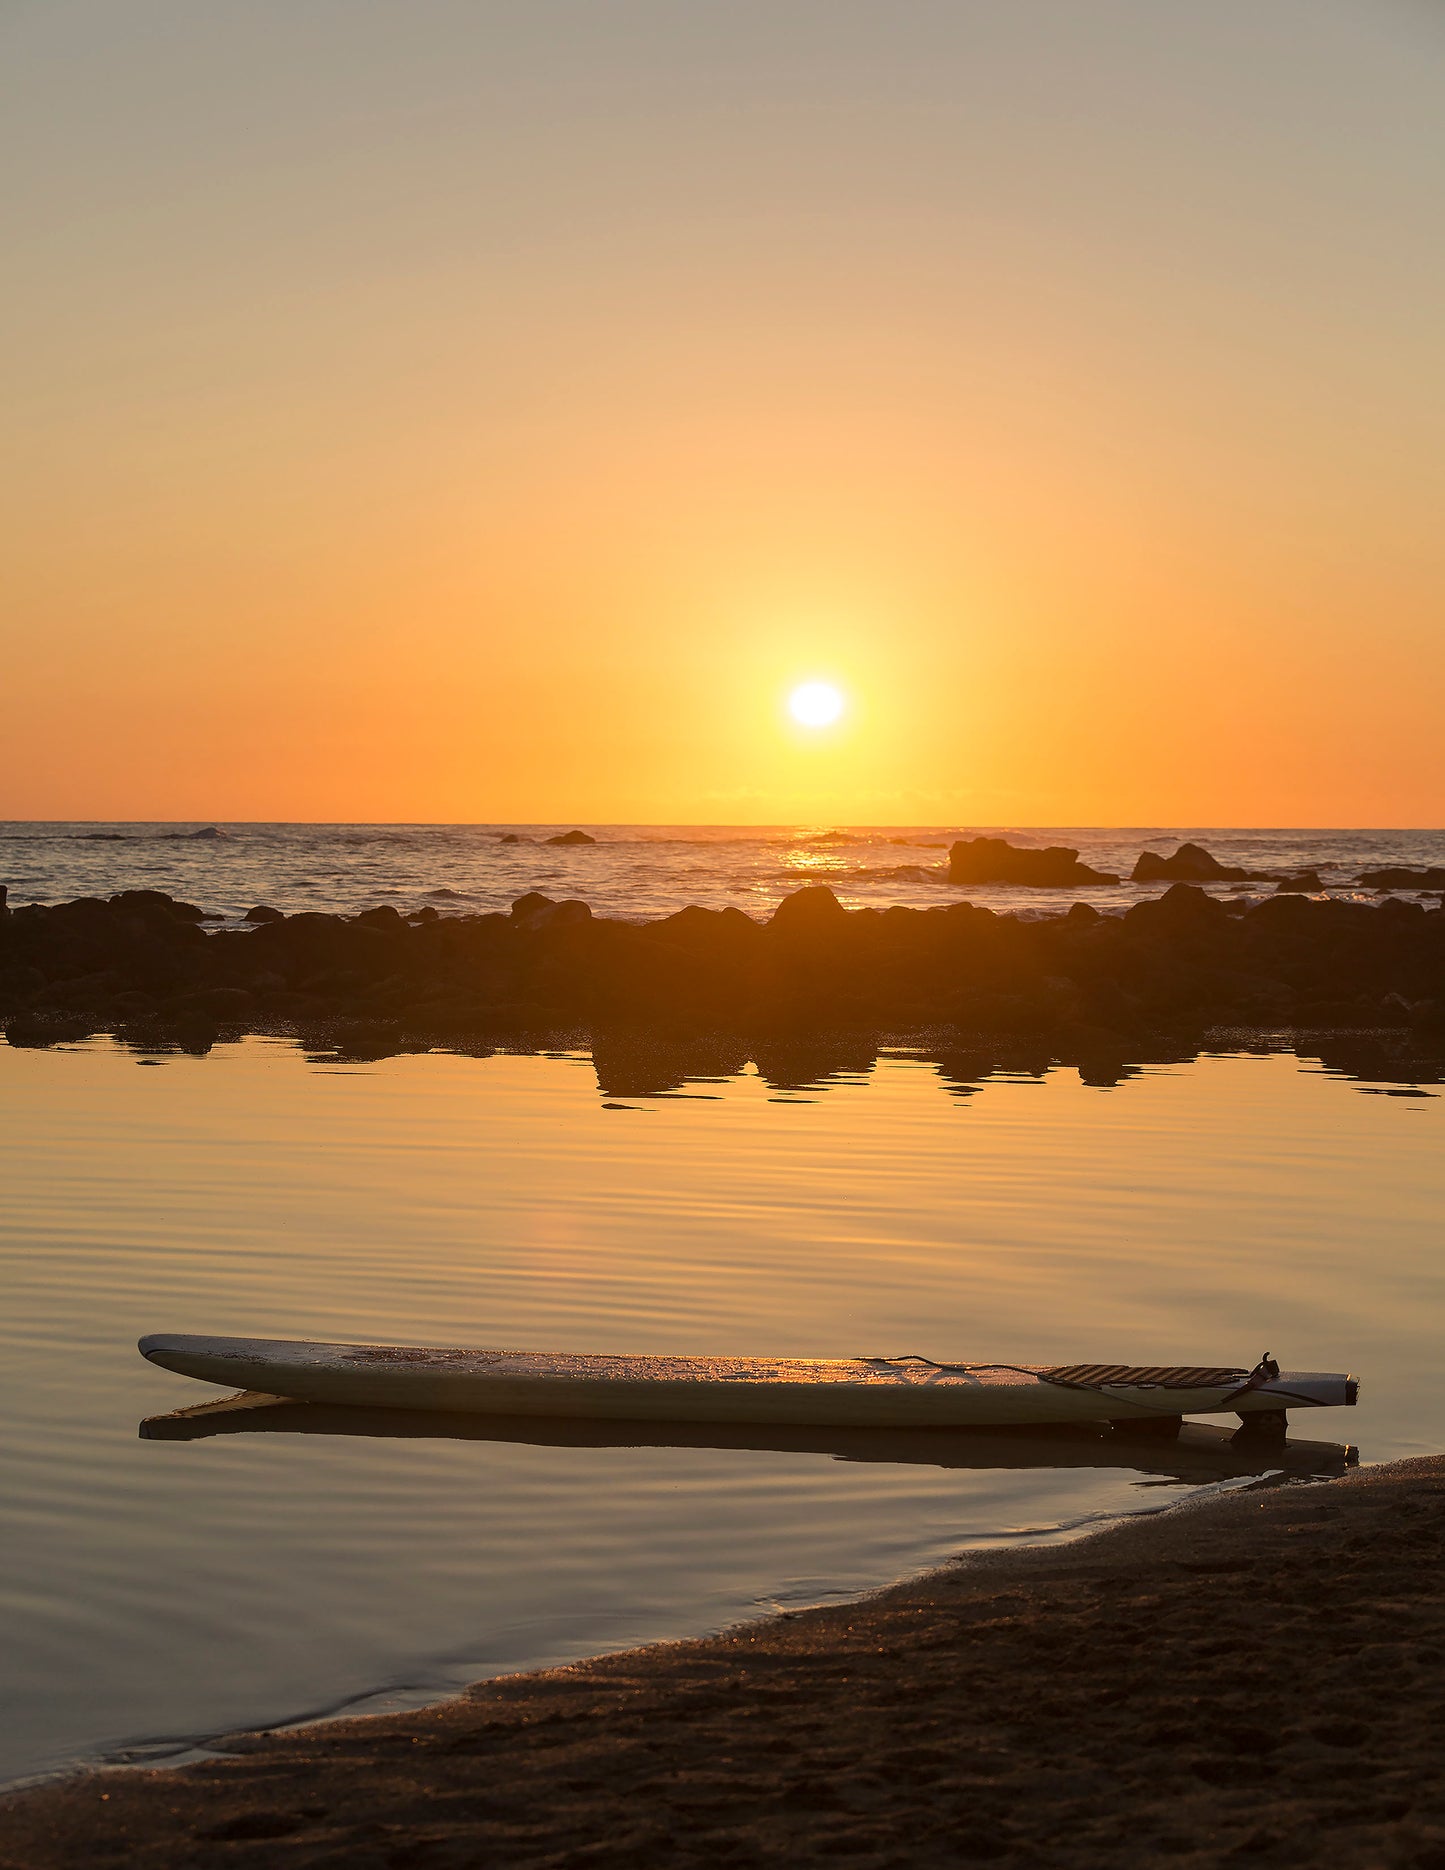 A surfboard floats in a calm pool with sunset in background and reflecting on the water. Fine art photograph by Kauai landscape photographers Inspiring Images Hawaii.